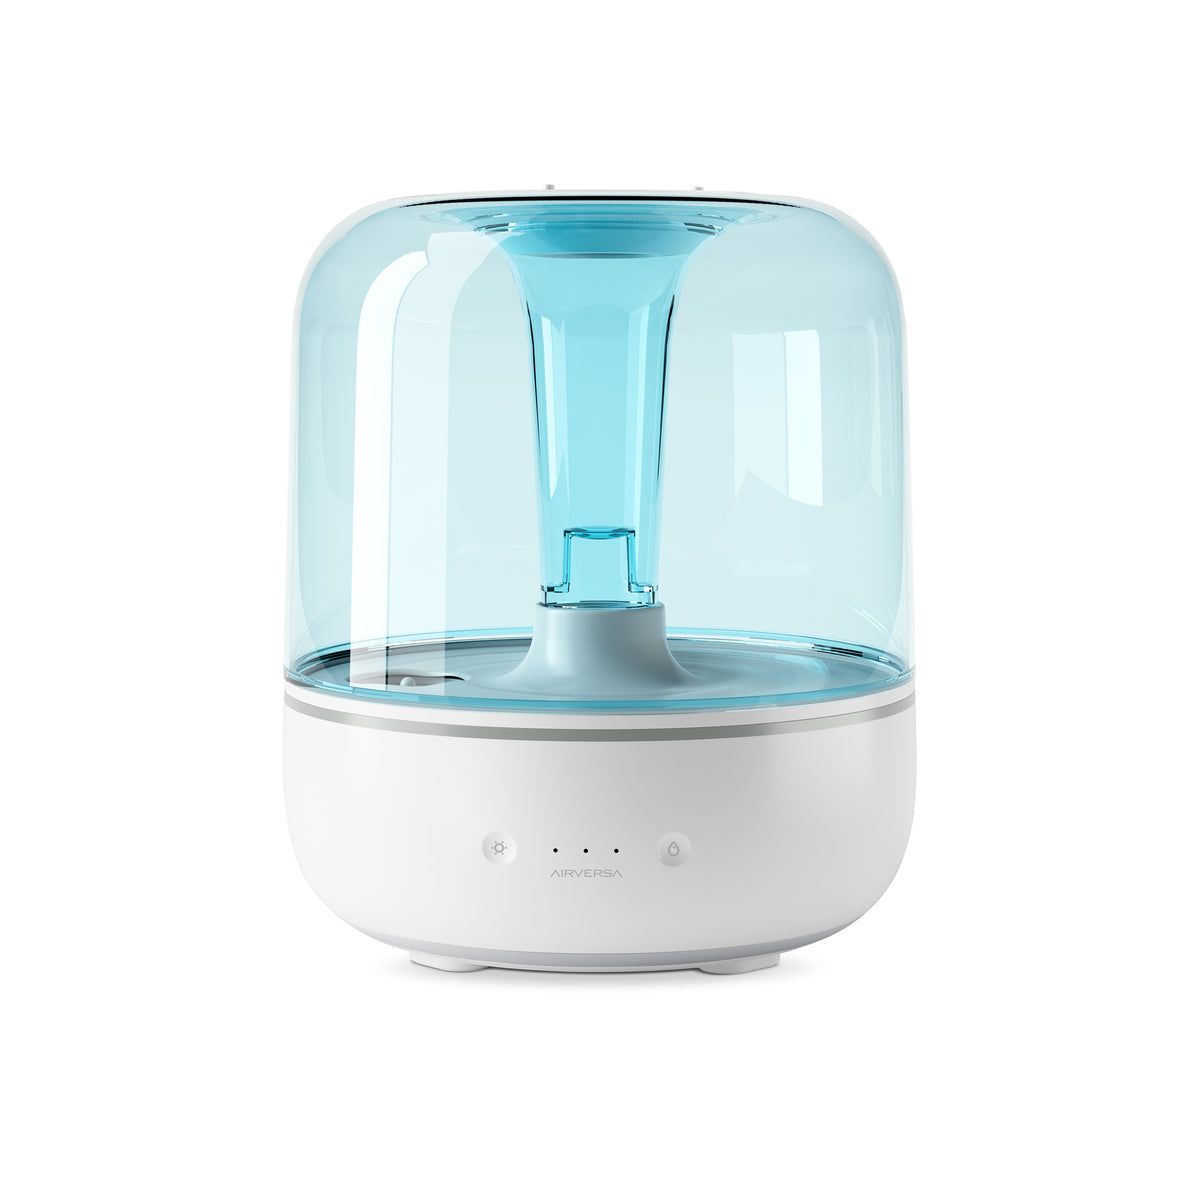 Smart Home Finds. This is a Smart humidifier that can detect the humid